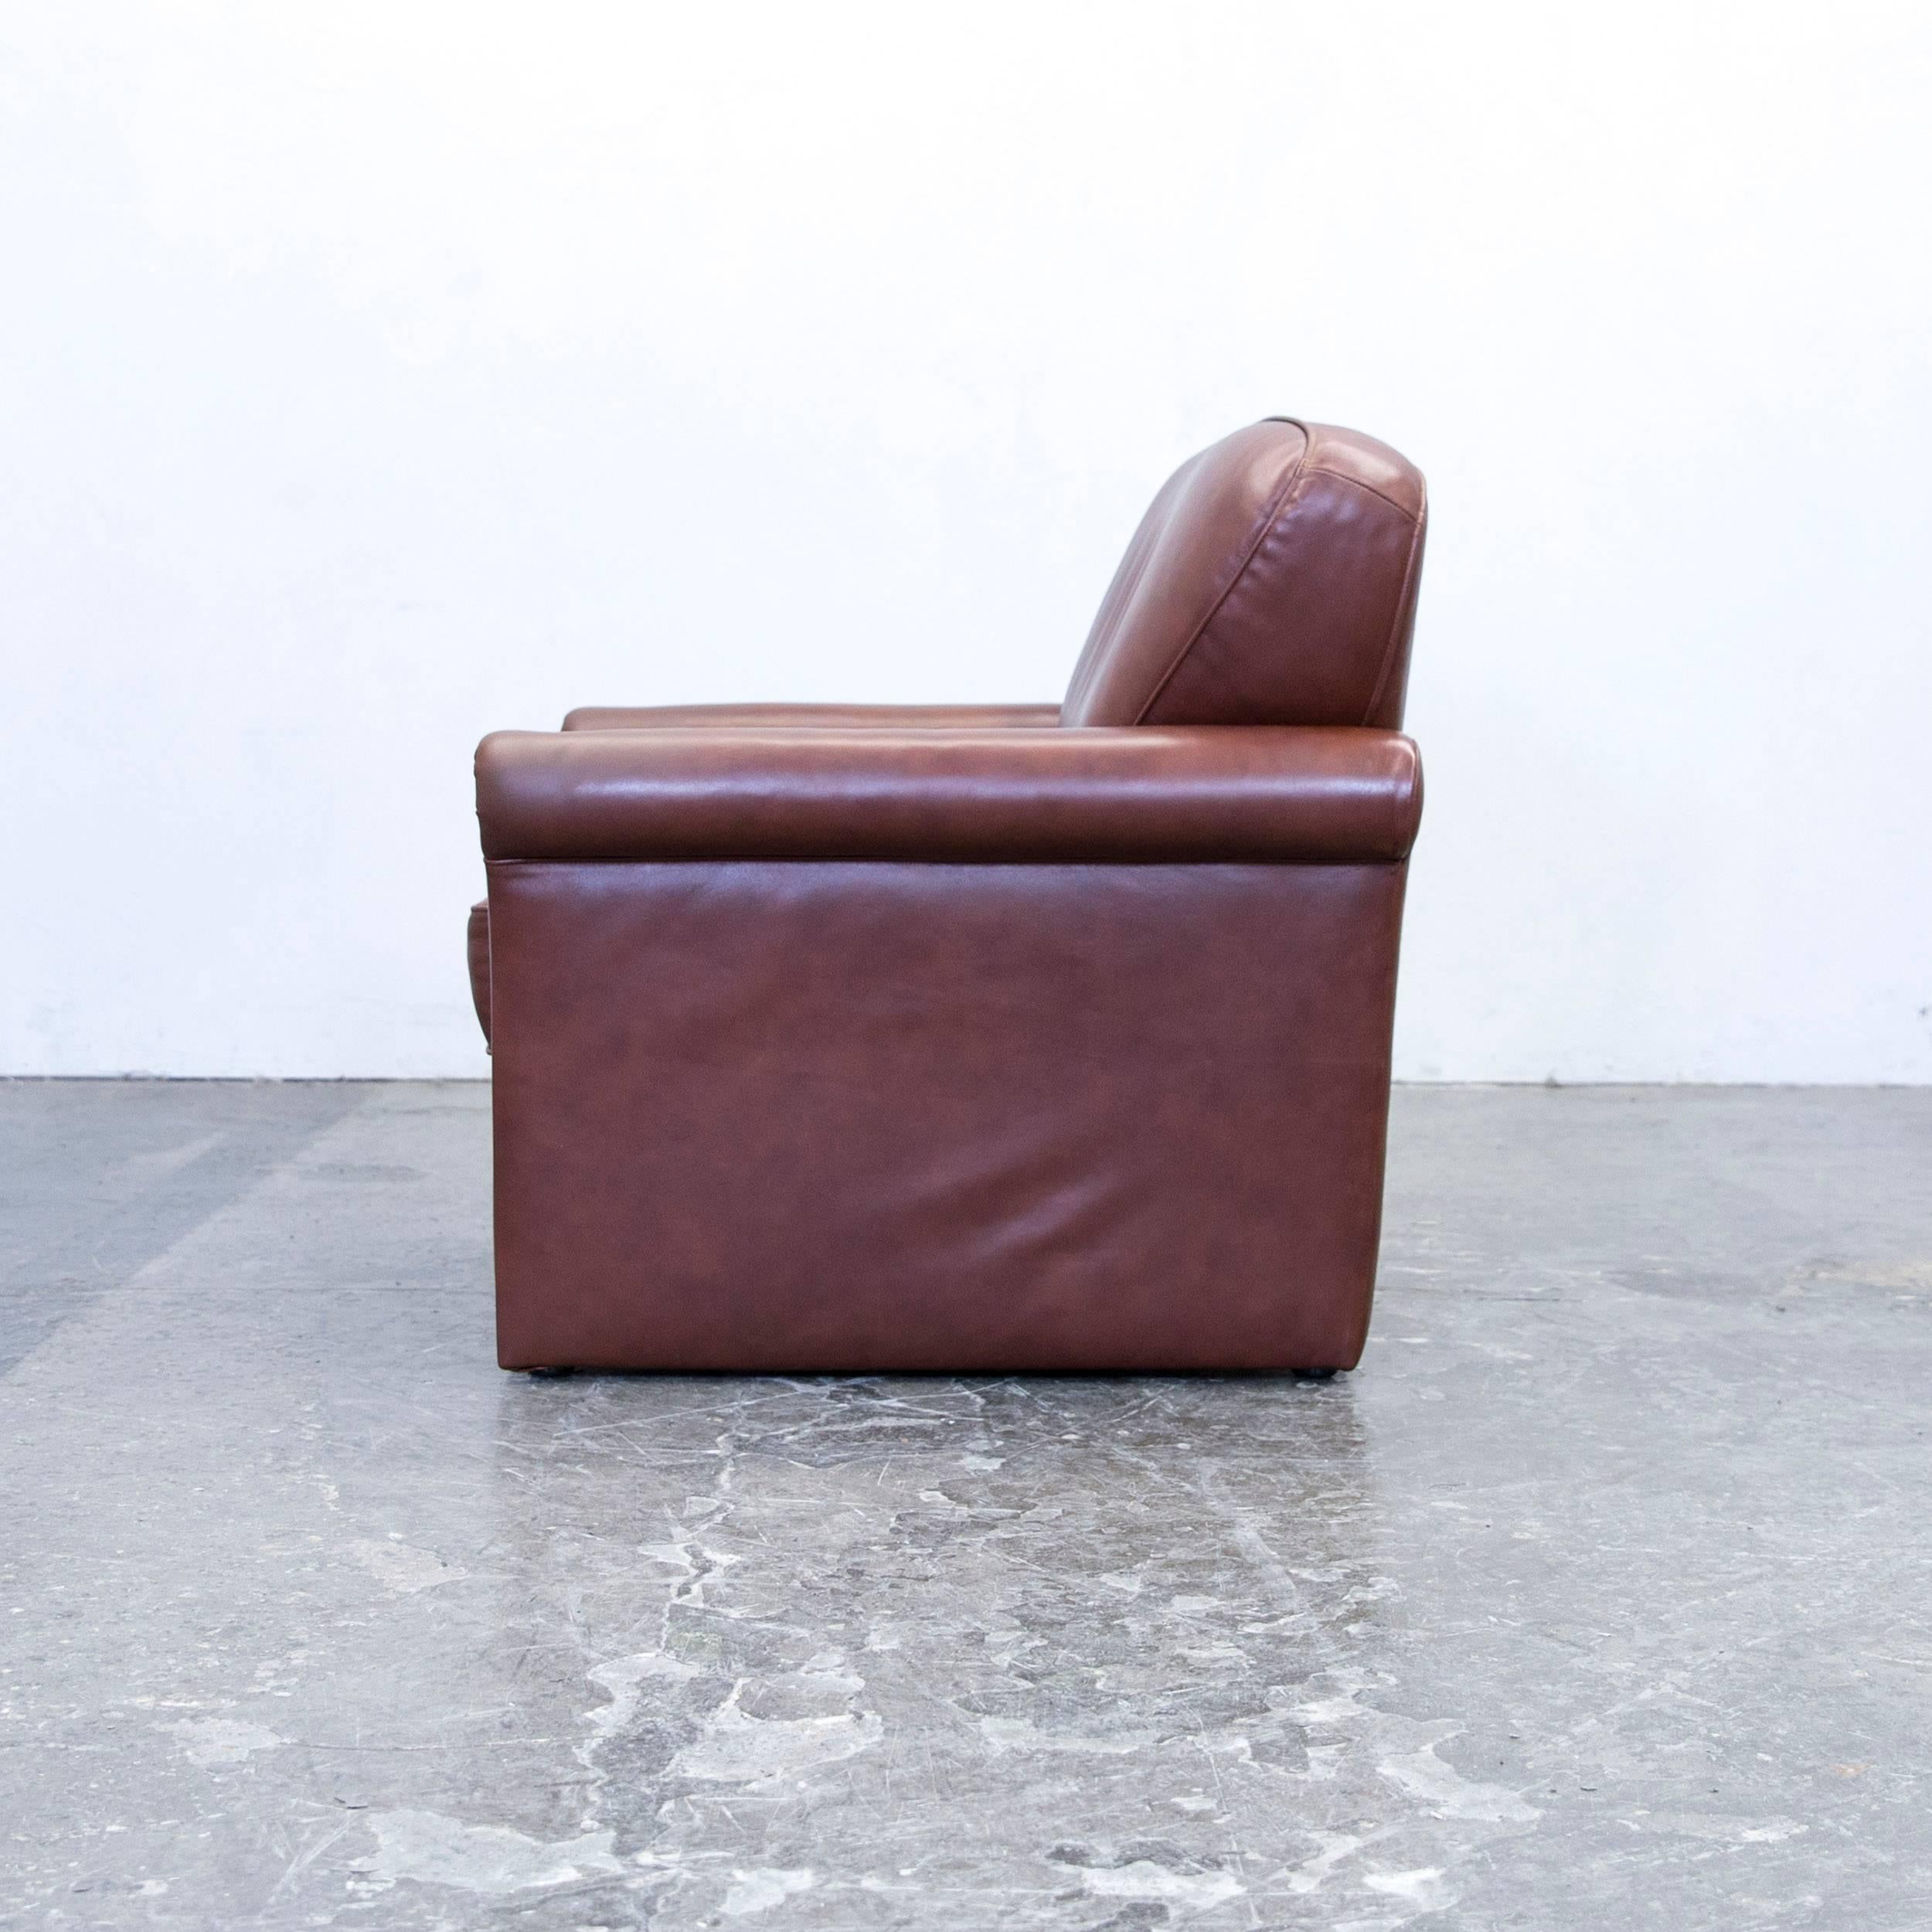 Gepade Akad´or Designer Armchair Leather Brown One-seat Couch Modern 3